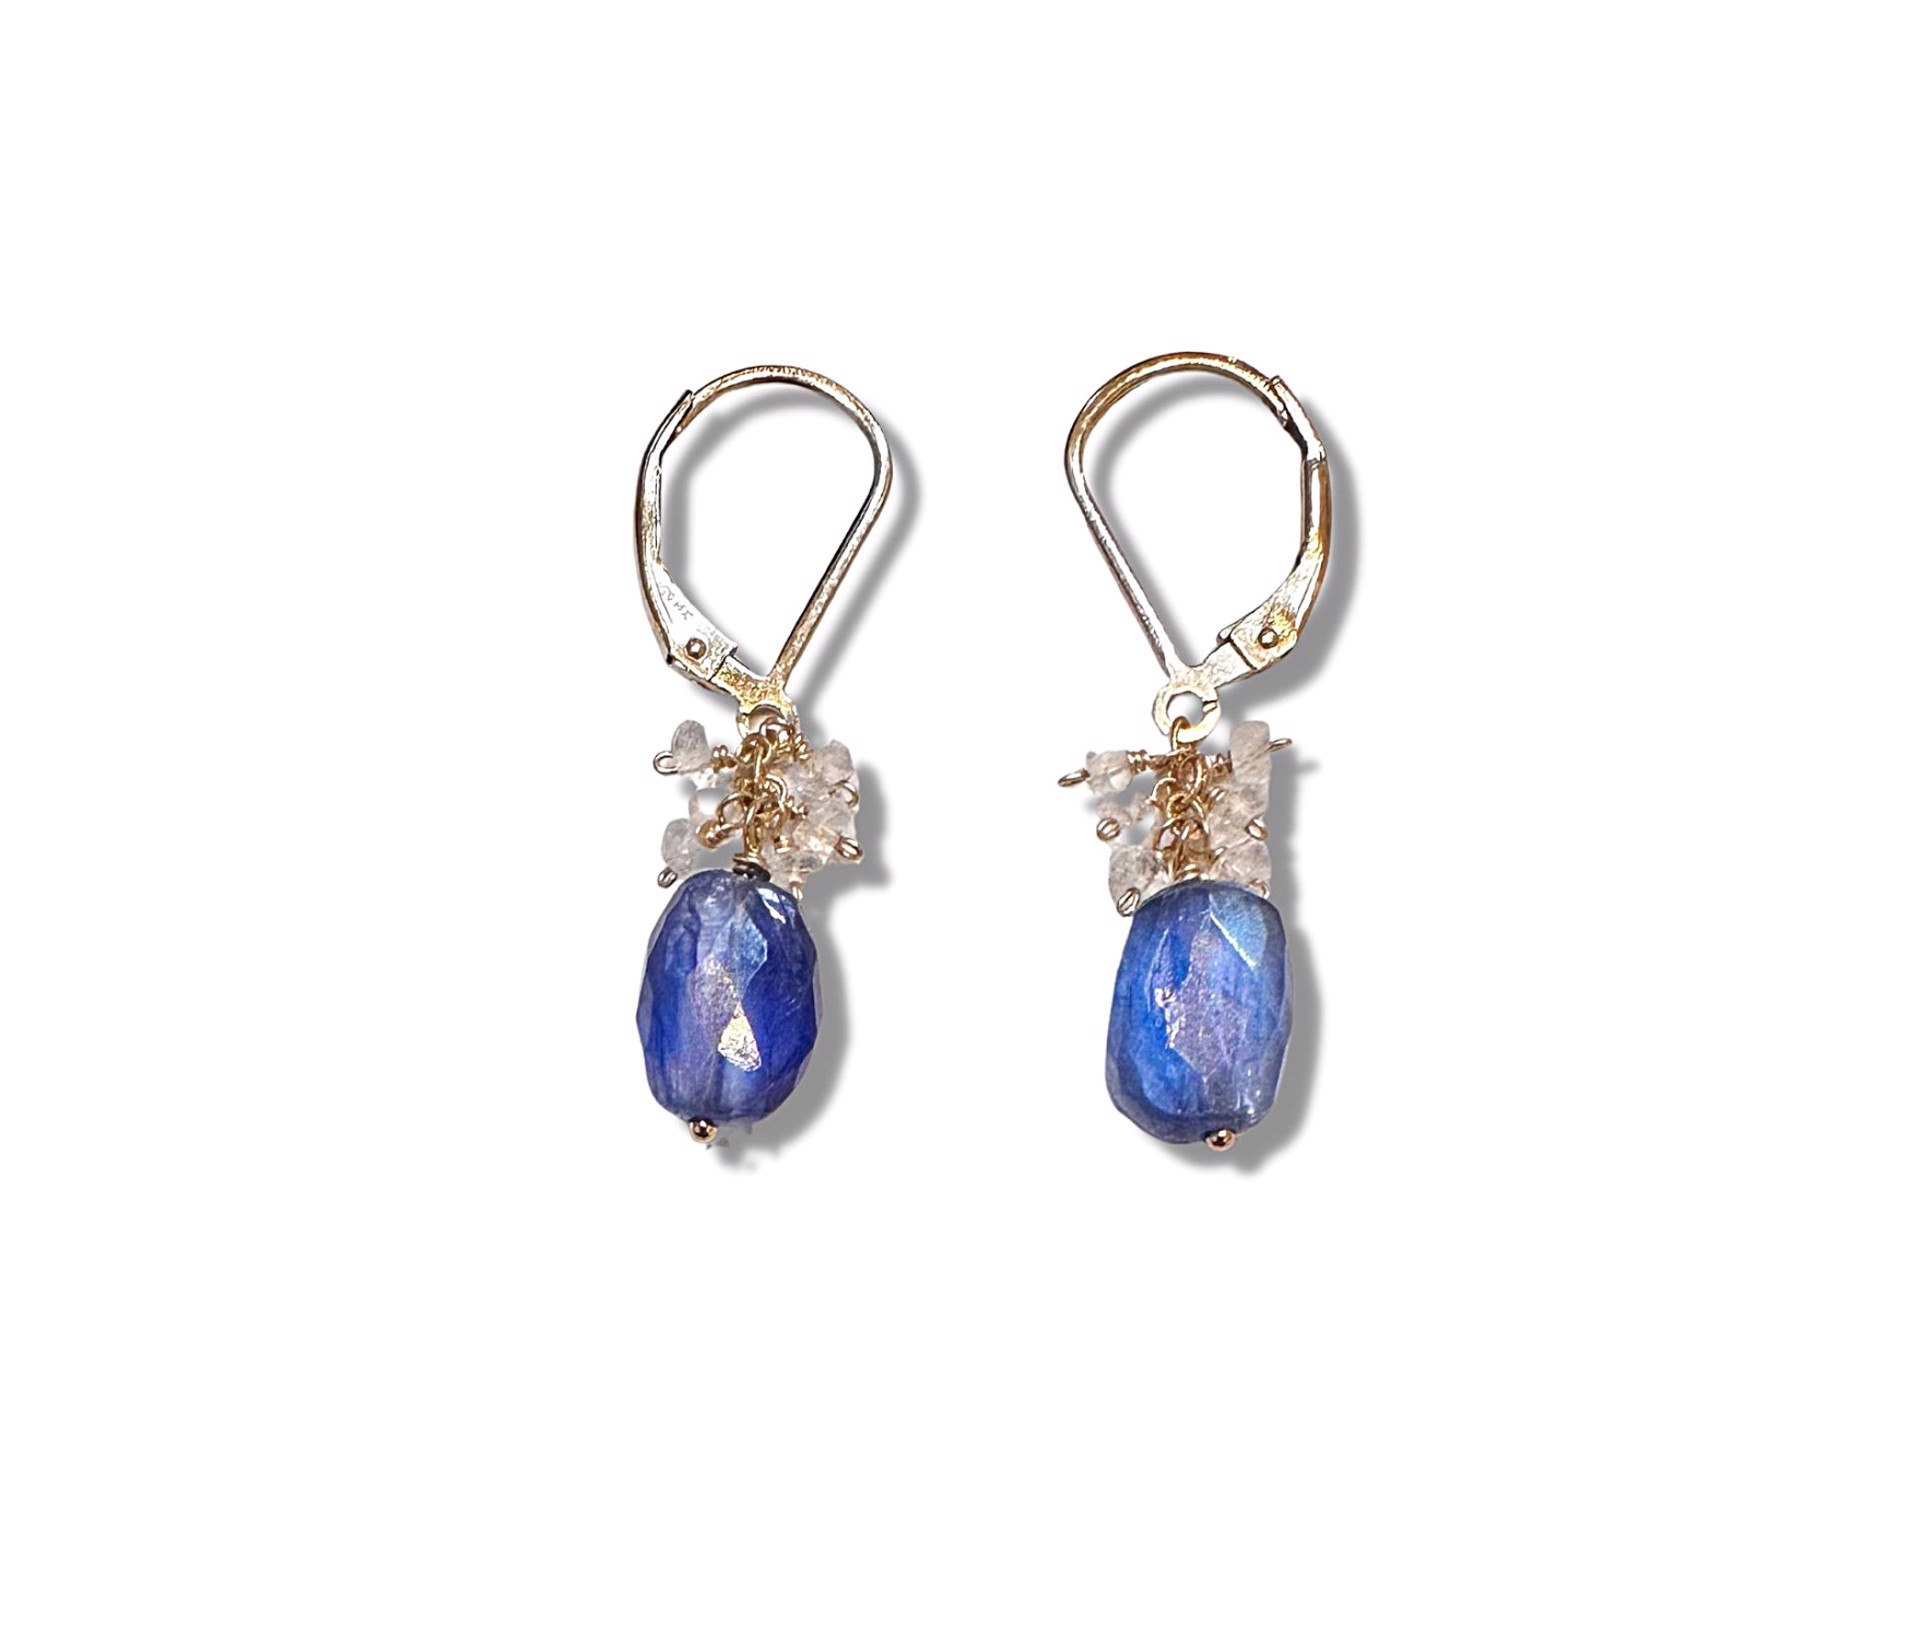 Earrings - Moonstone and Blue Kyanite with 14K Gold Filling by Julia Balestracci